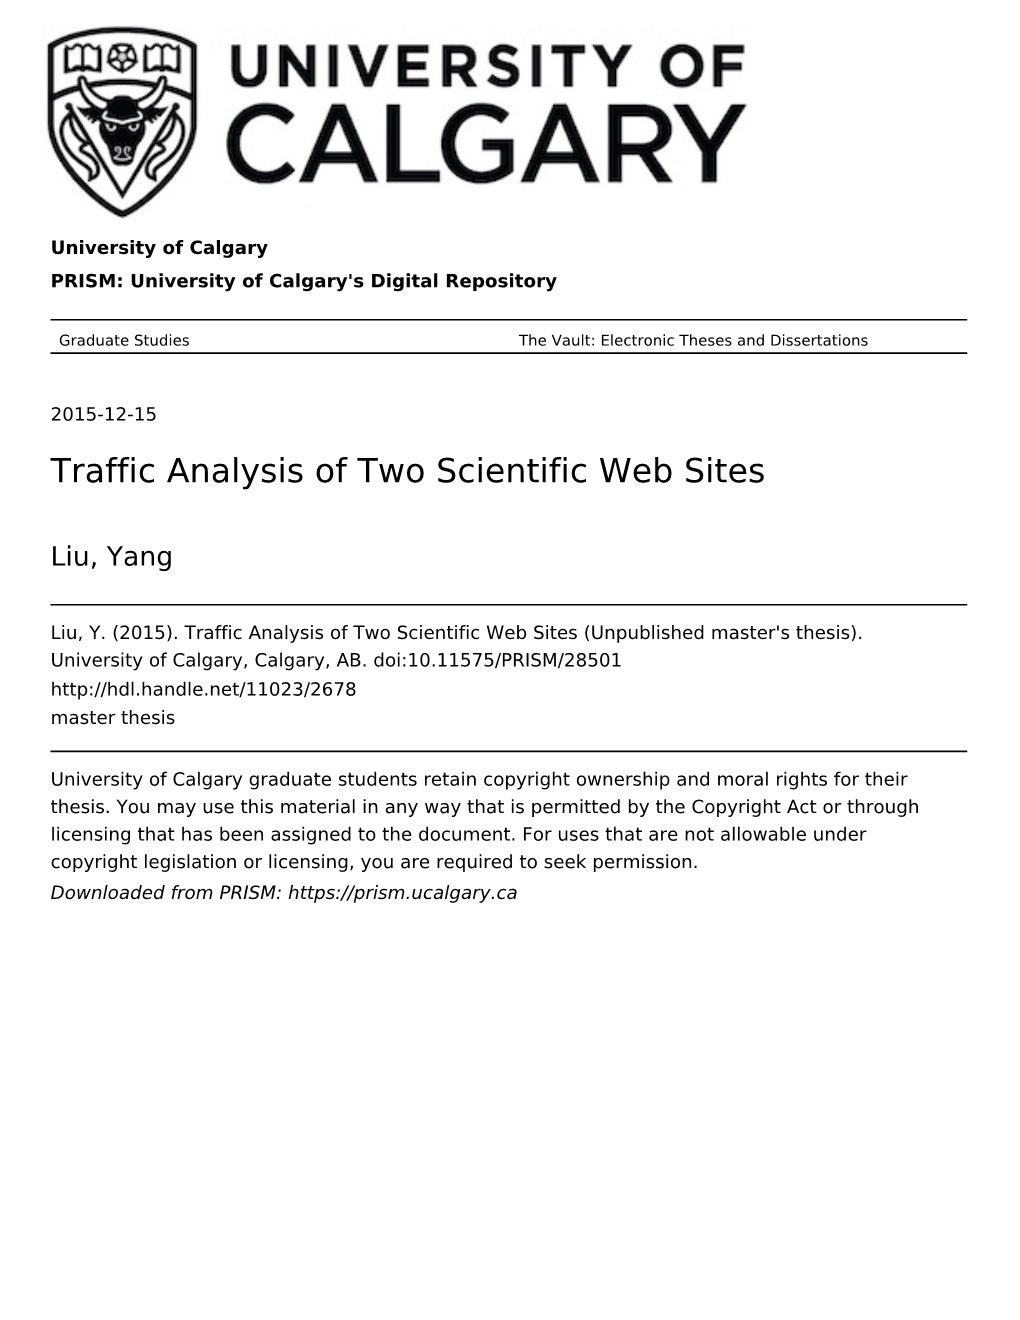 Traffic Analysis of Two Scientific Web Sites